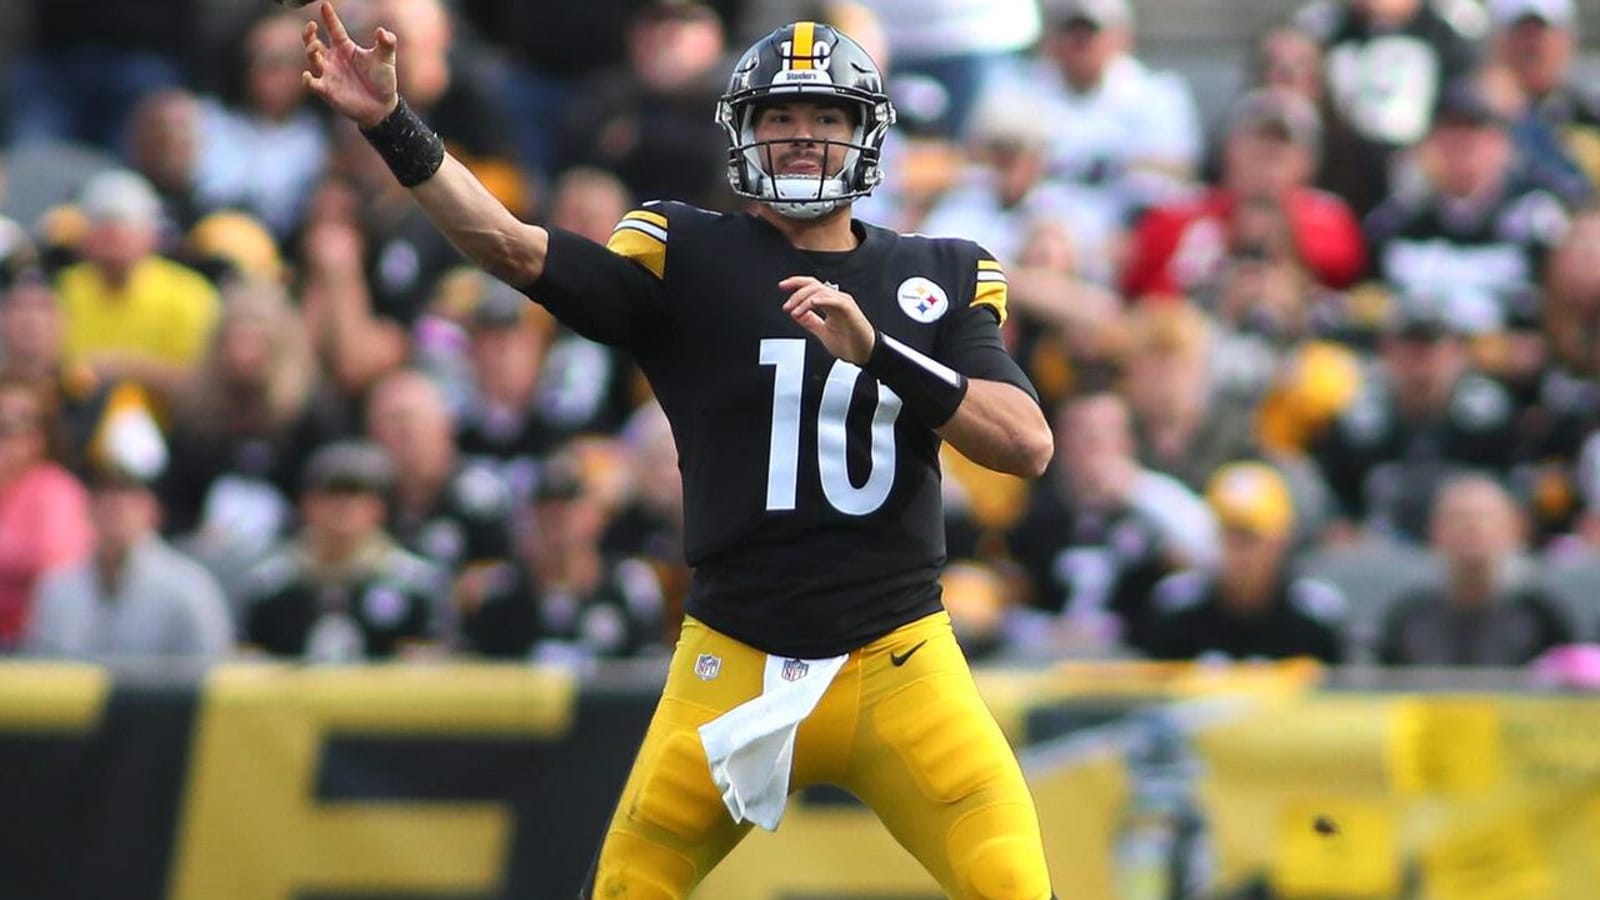 Is QB controversy brewing after Trubisky leads Steelers to win in relief of Pickett?